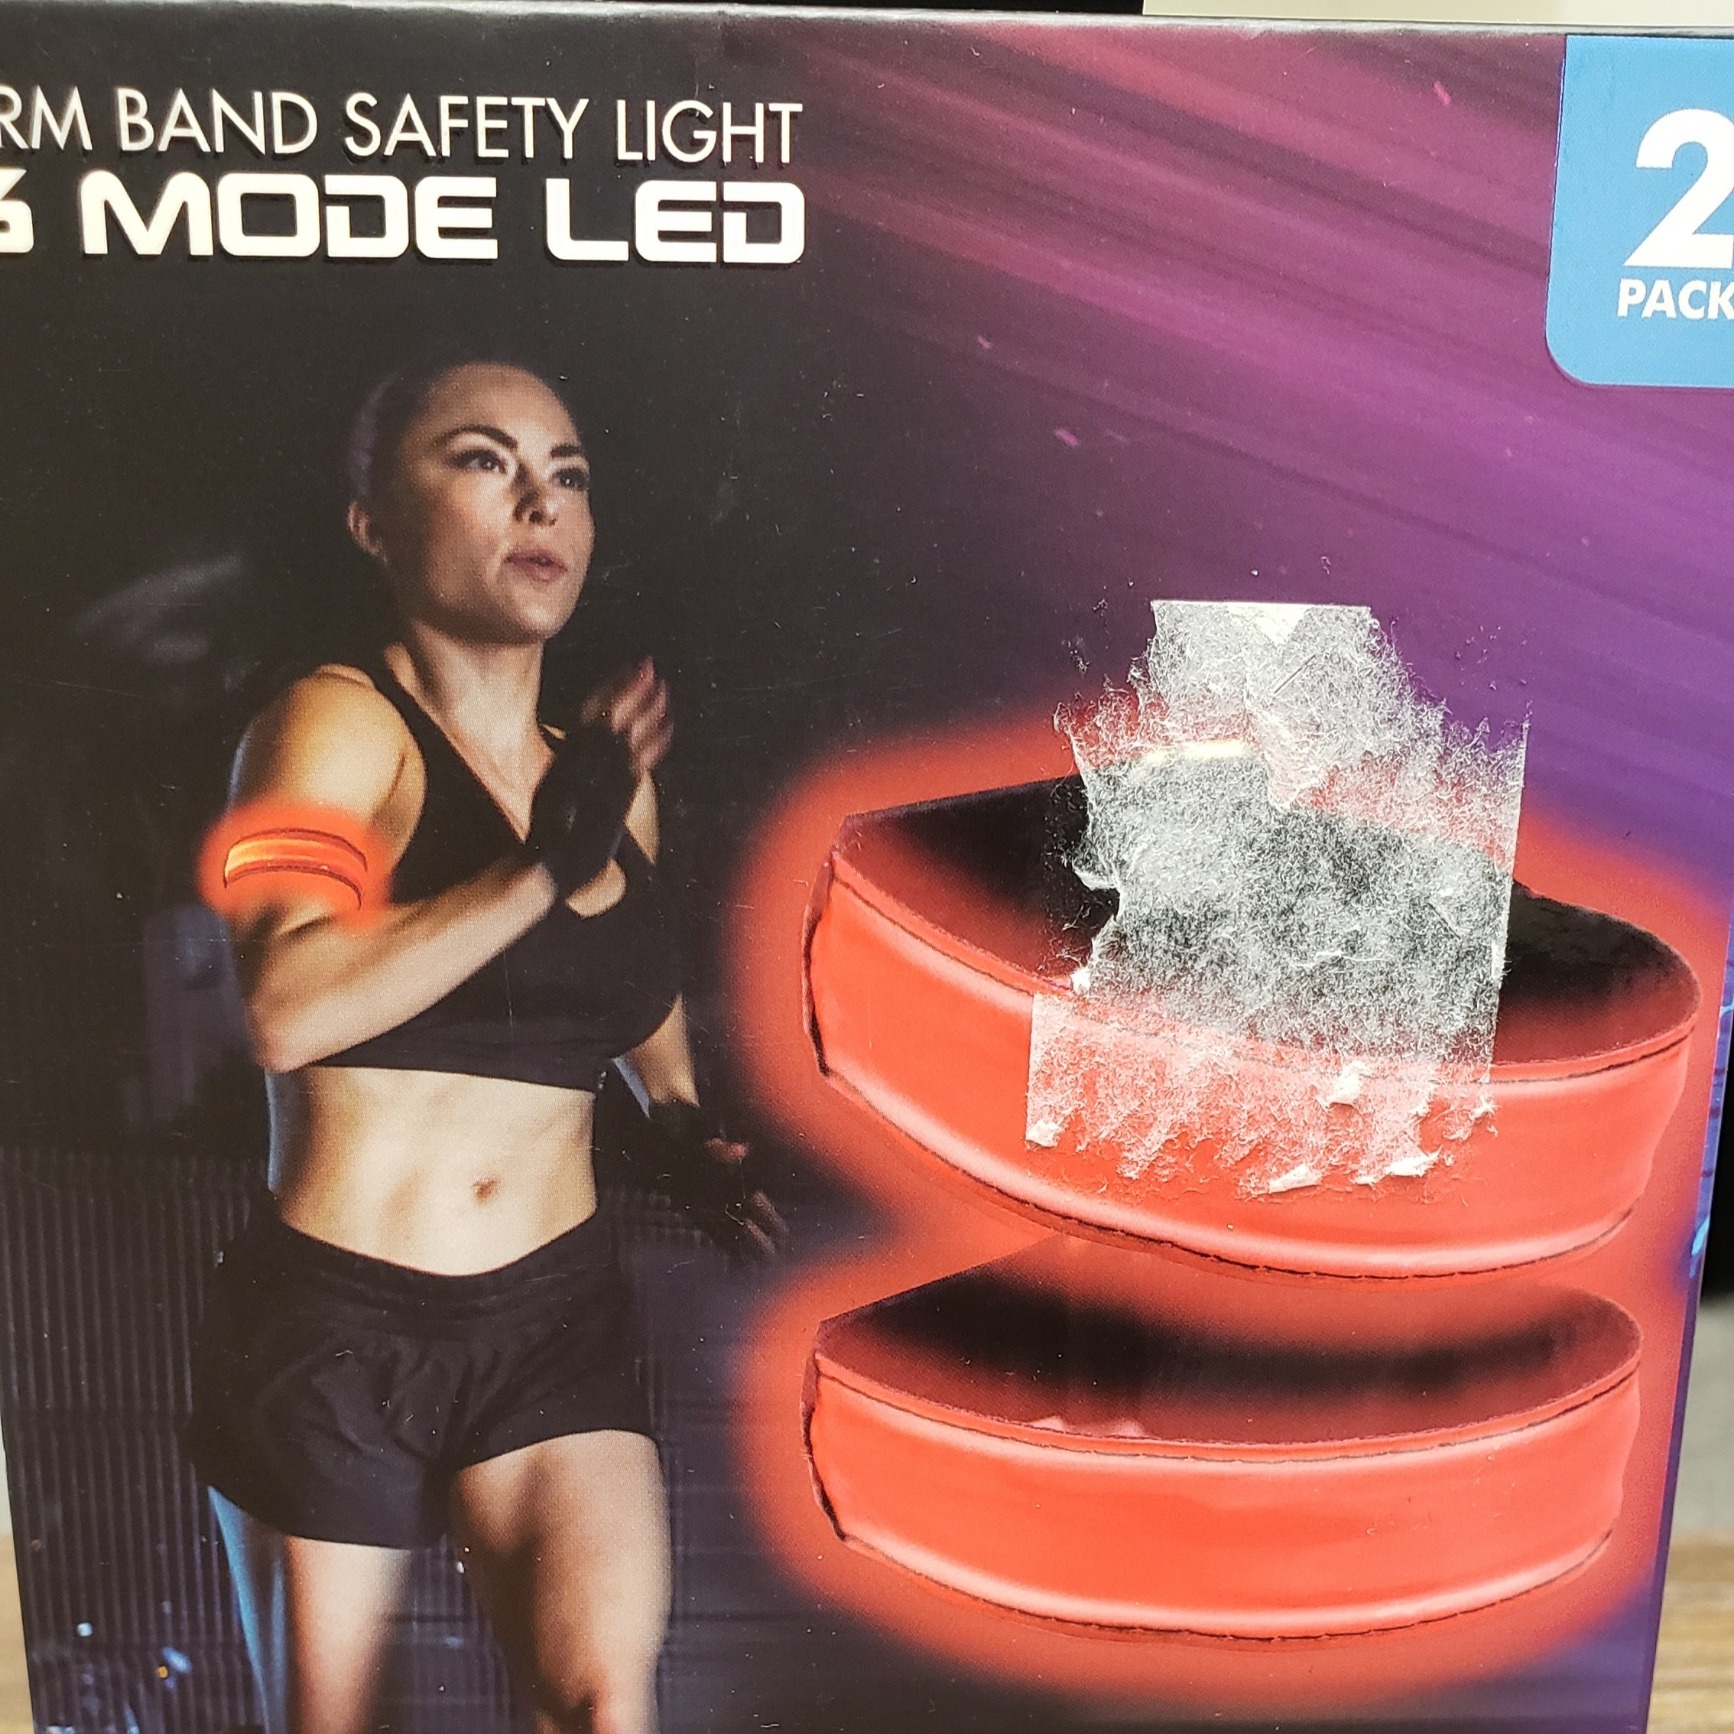 arm band safety light